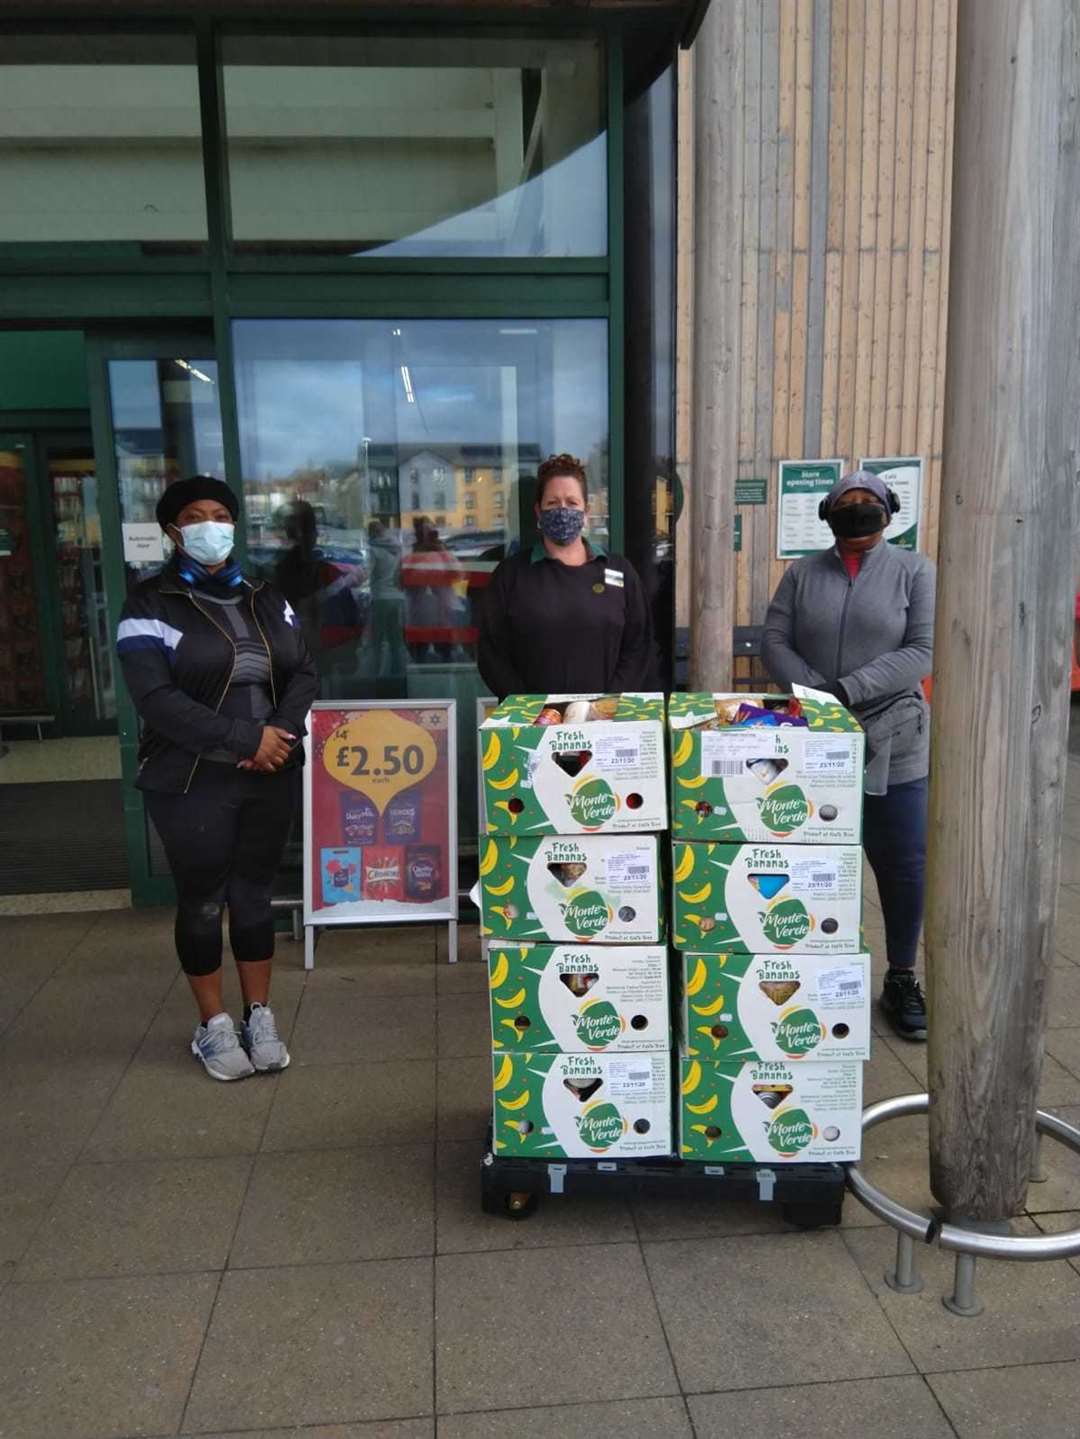 The Sittingbourne Morrison's champinons have been doing a load of charity work during the pandemic (43331257)